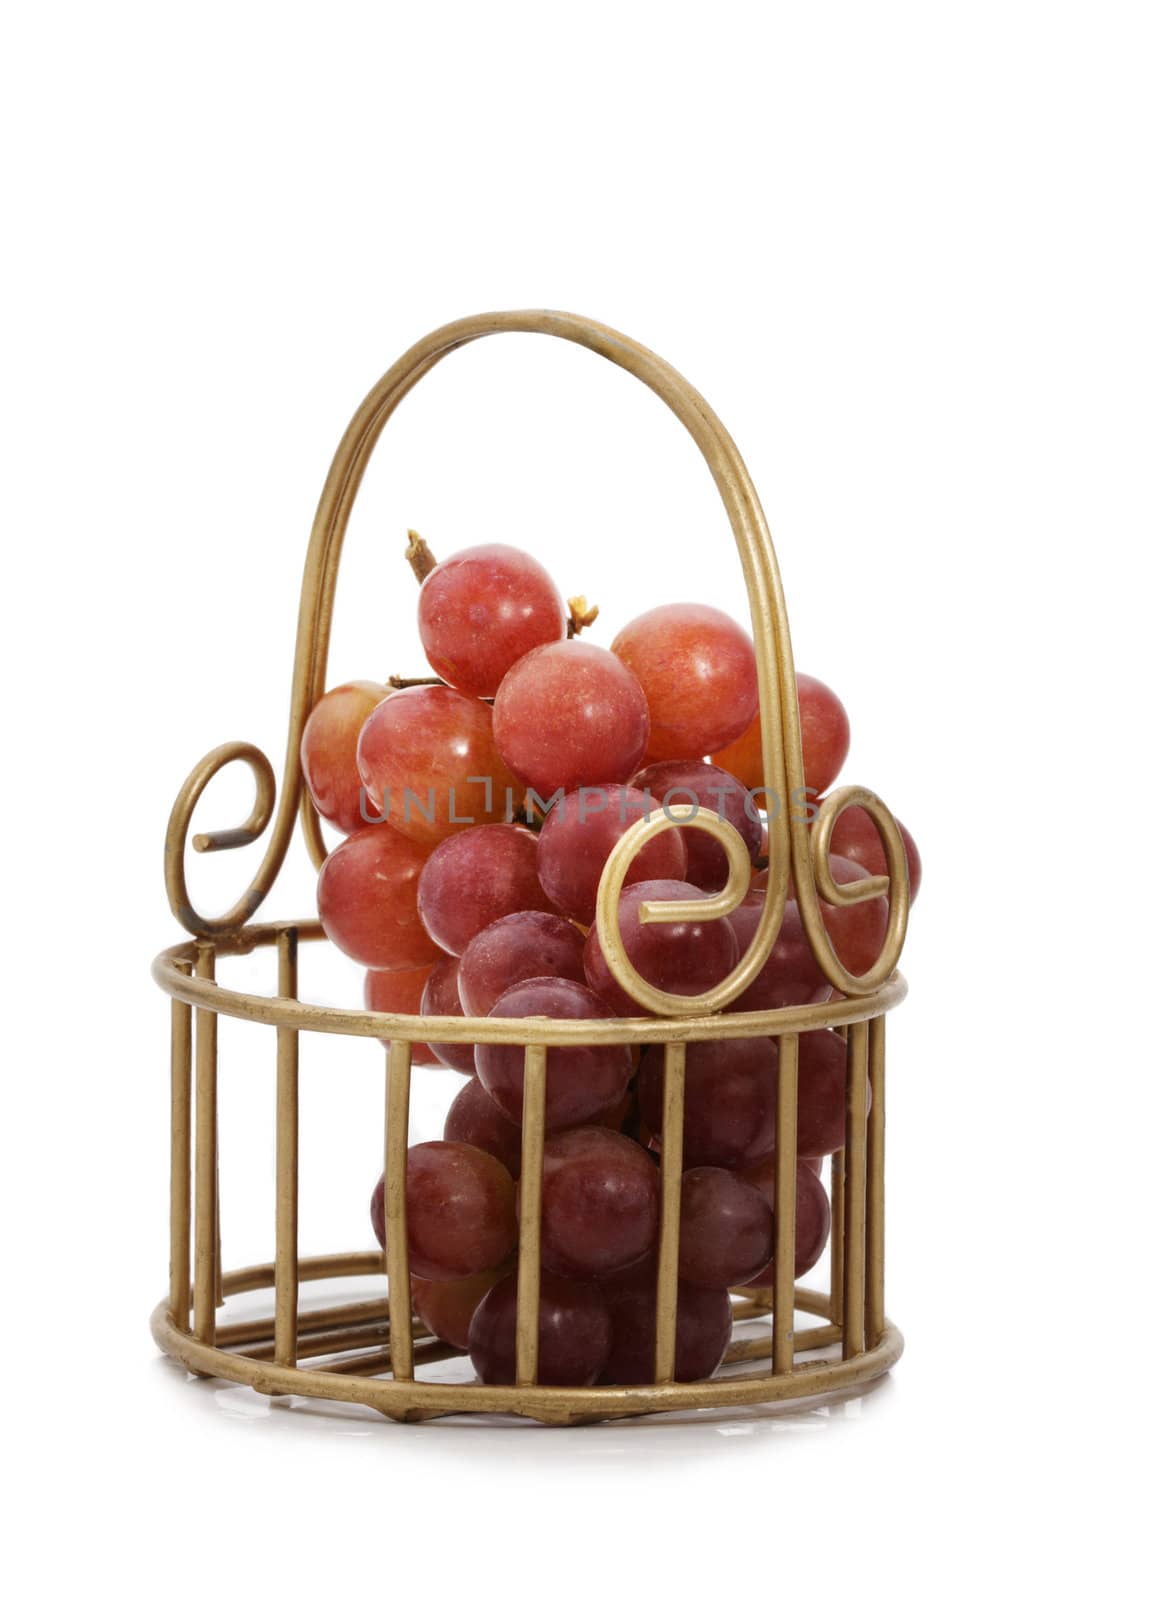 red grape in golden basket by lanalanglois